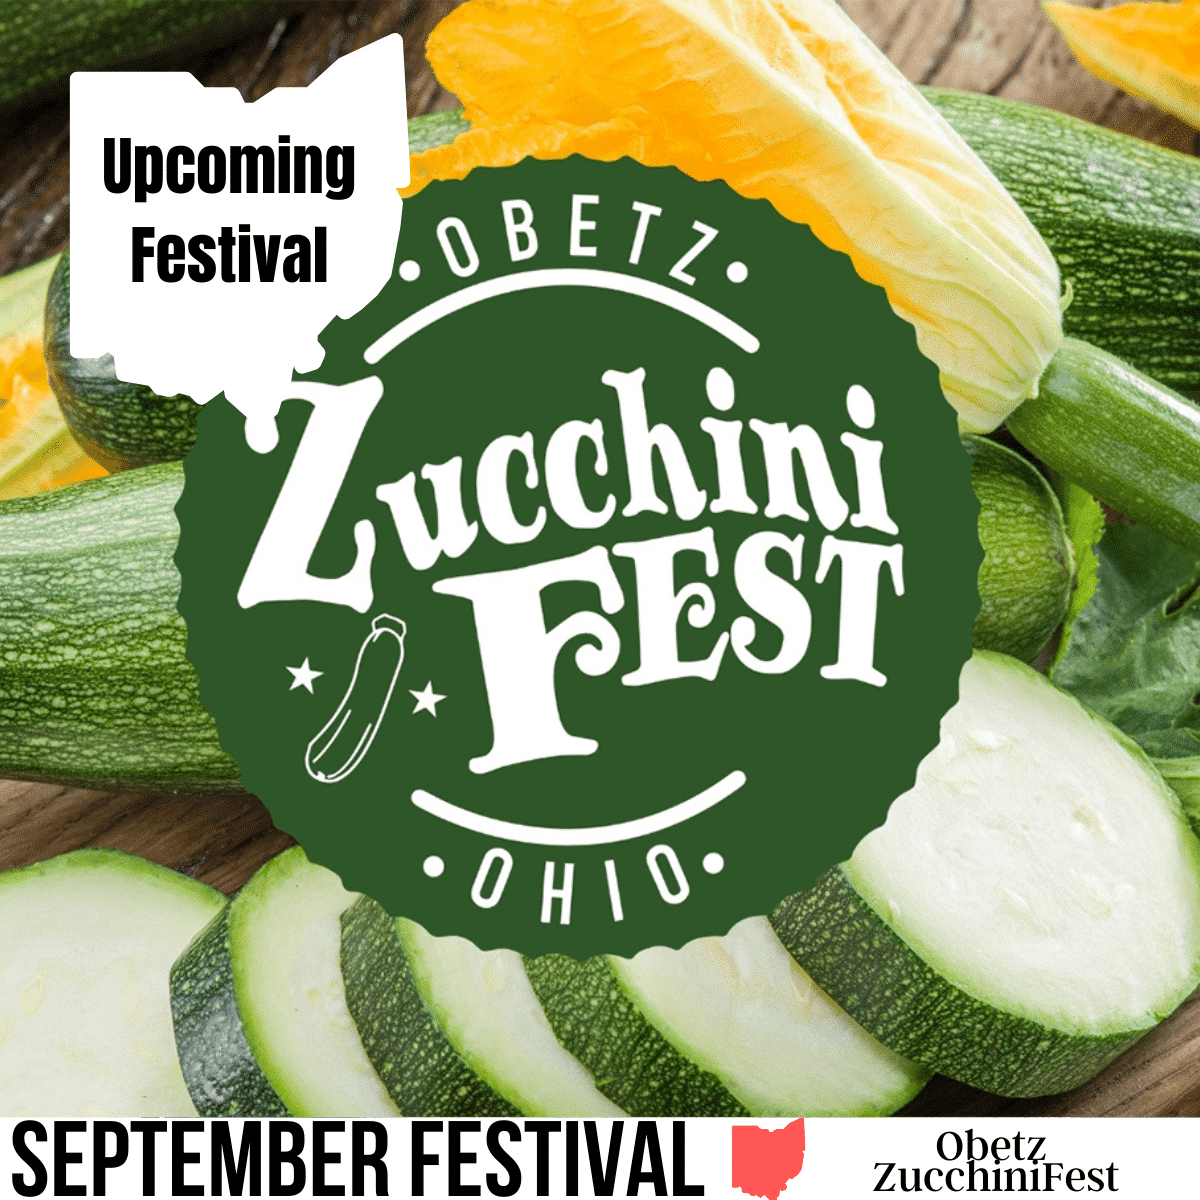 square image of the obetz zucchini fest logo with a background of green and yellow zucchinis